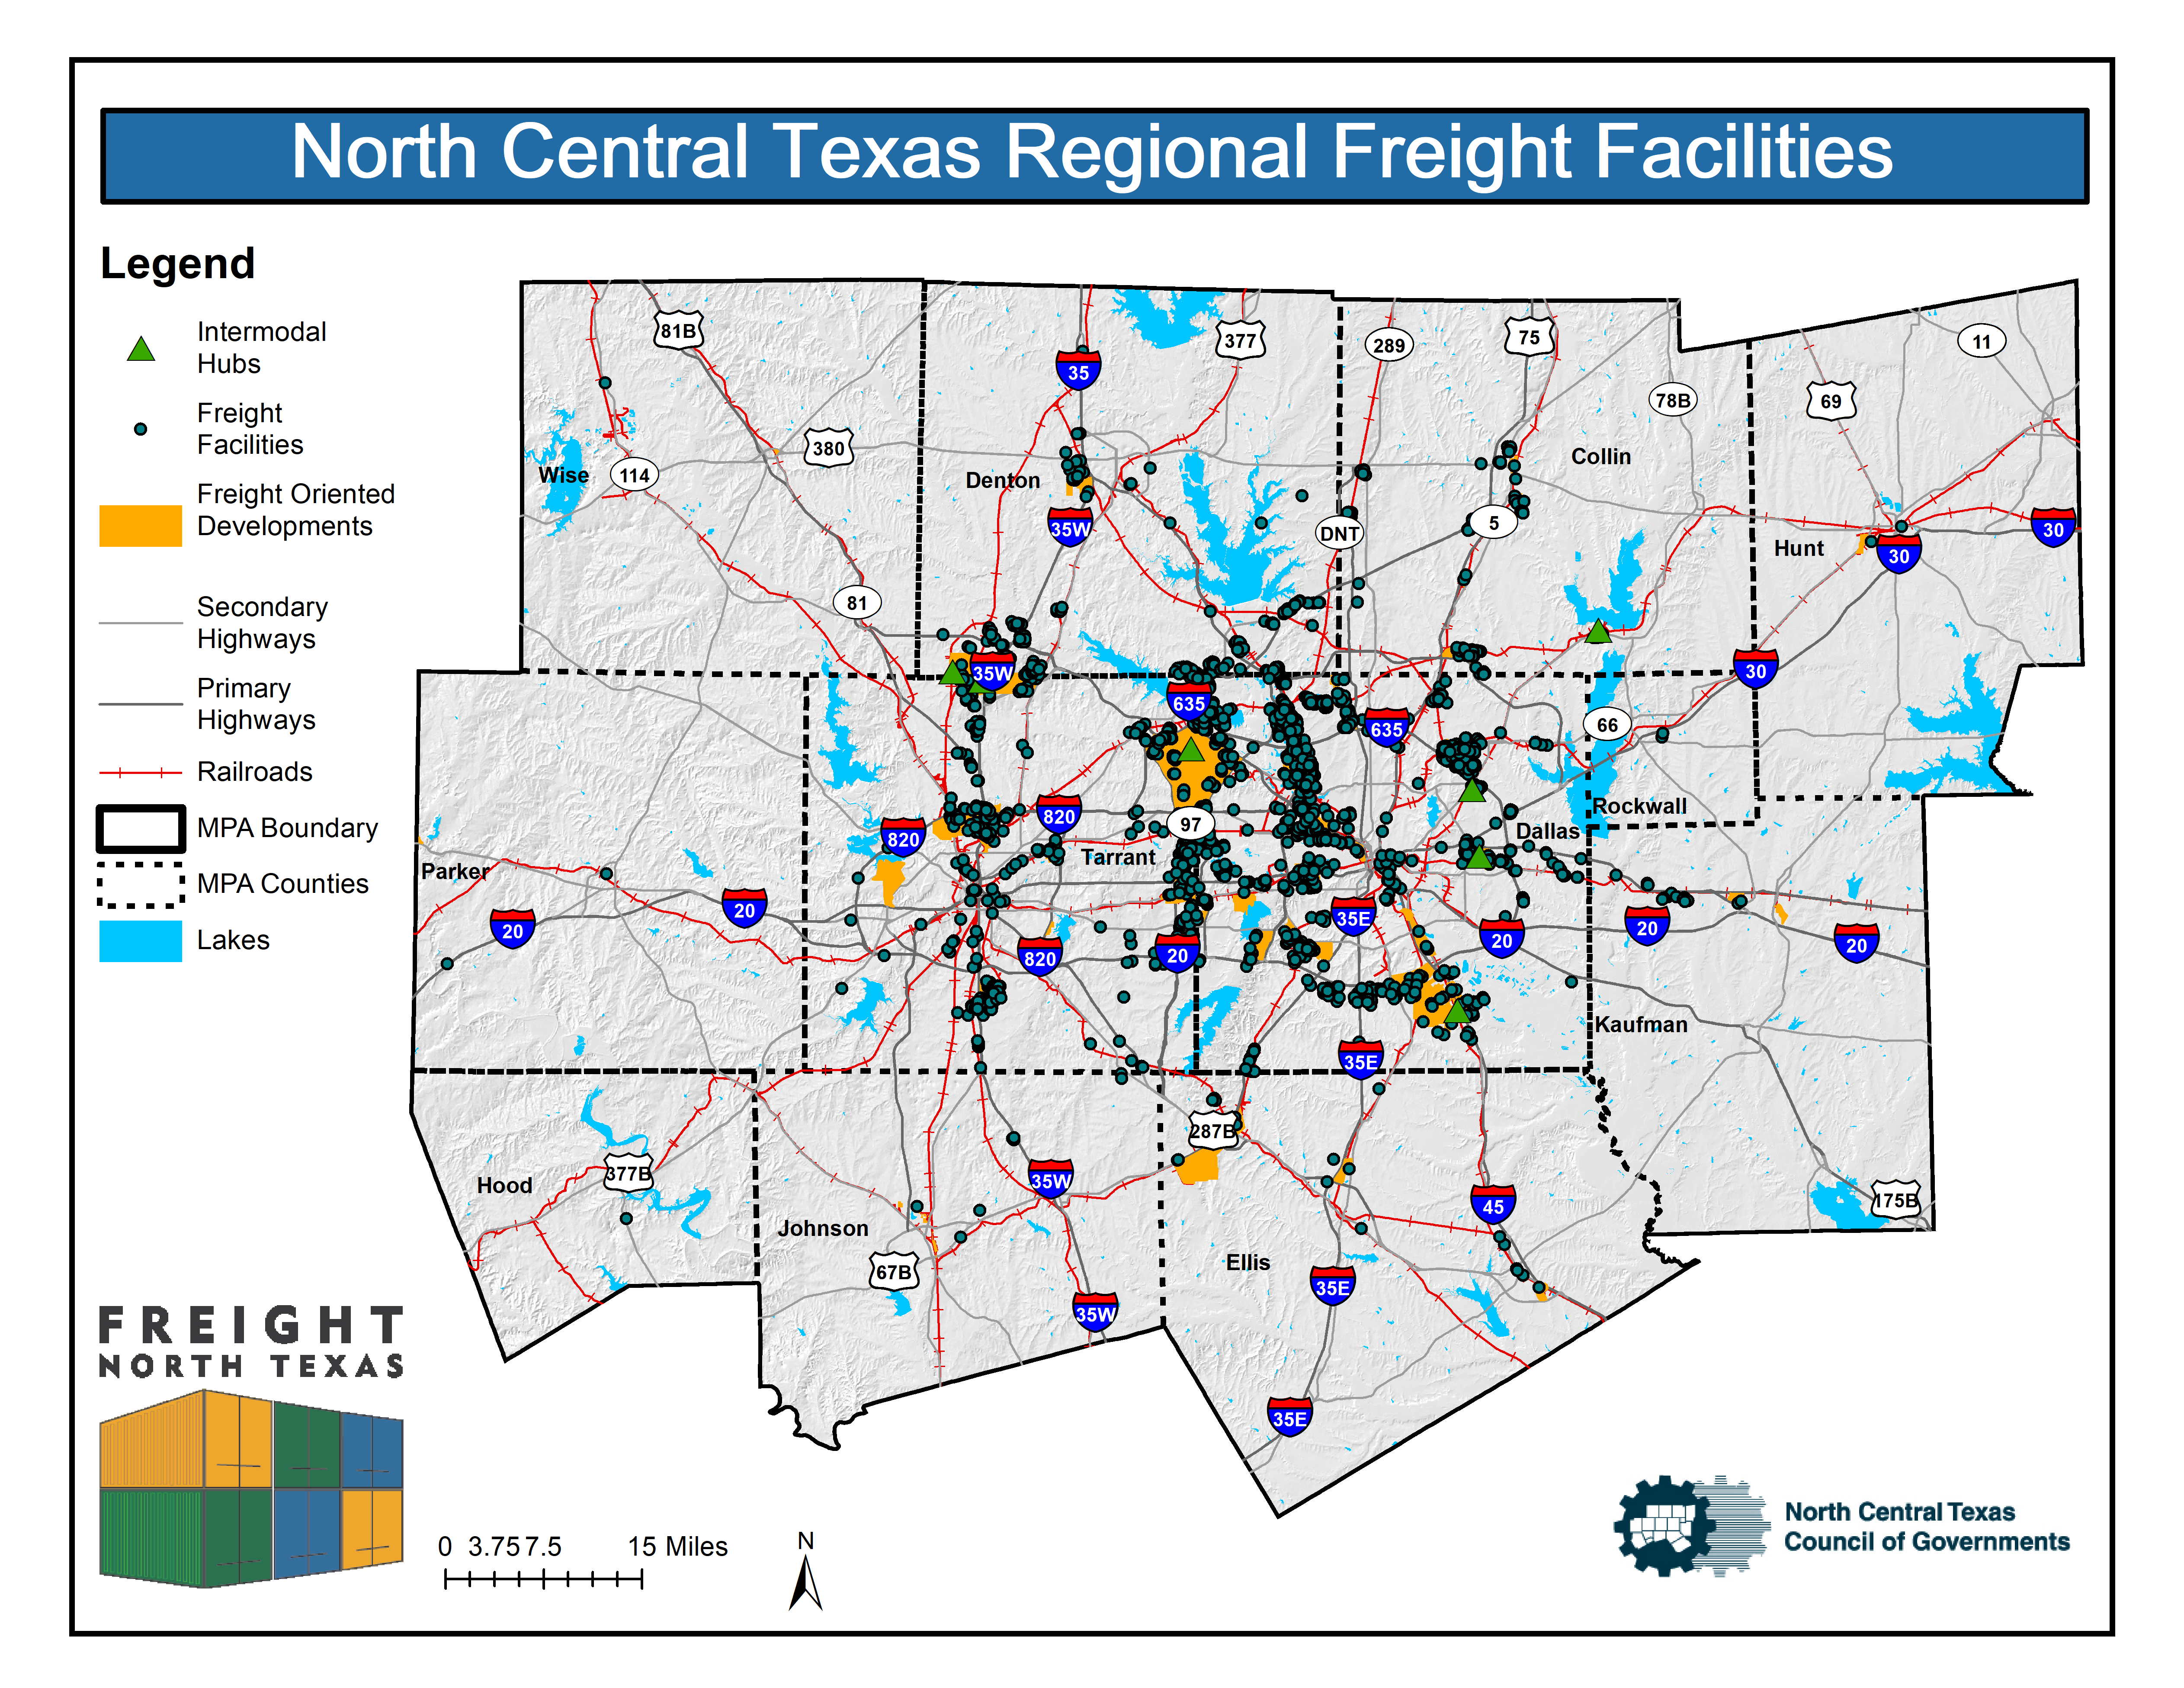 The North Central Texas Regional Freight Facilities